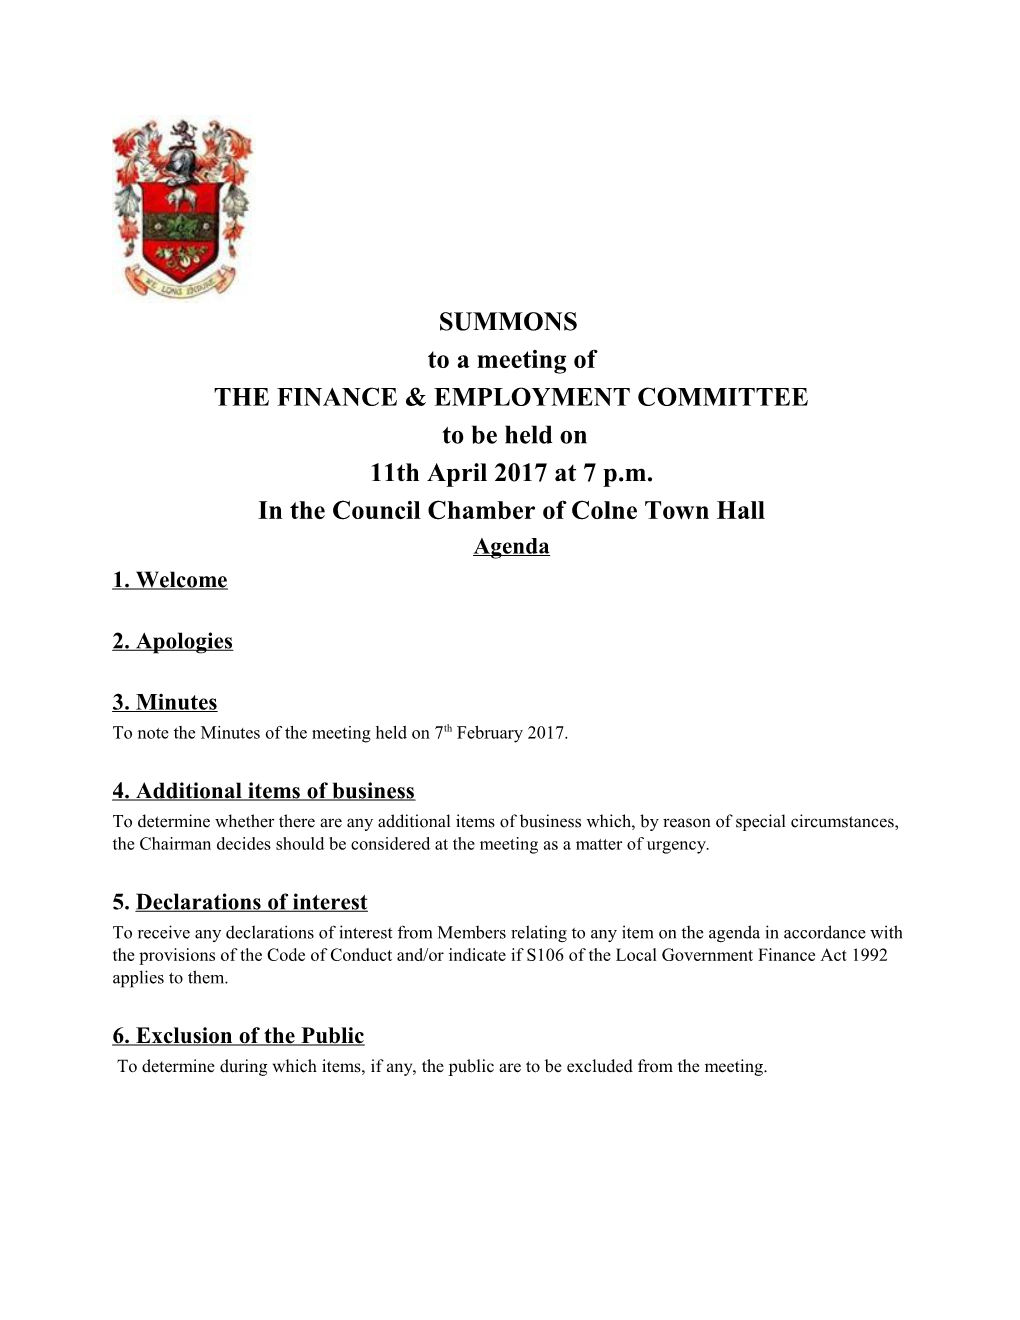 The Finance & Employment Committee